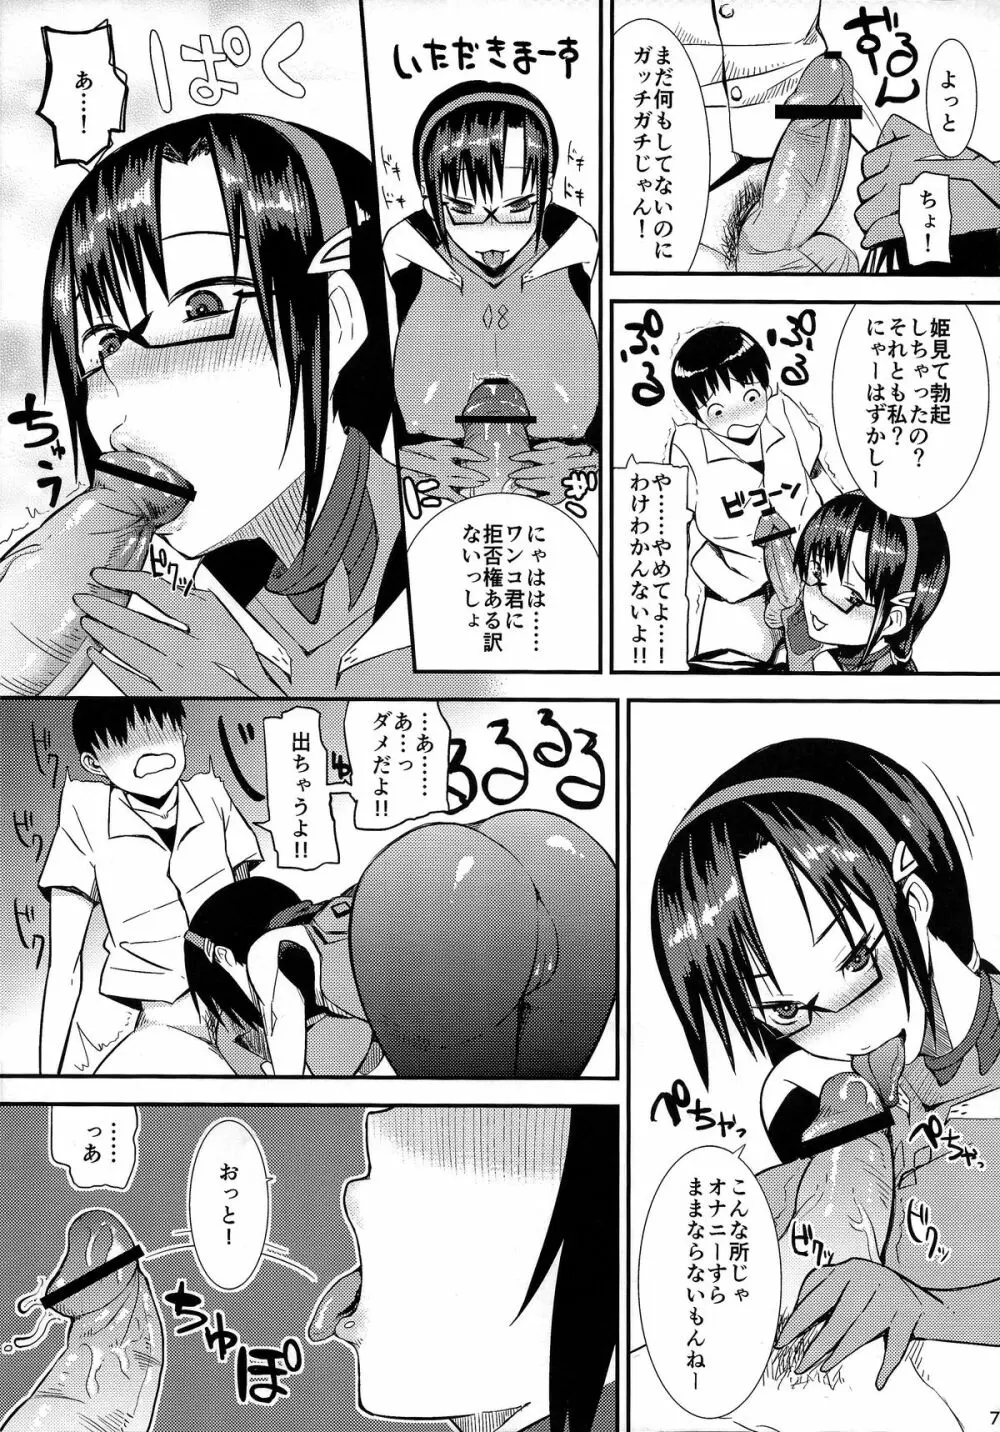 Qに来たので。1.0 - page7